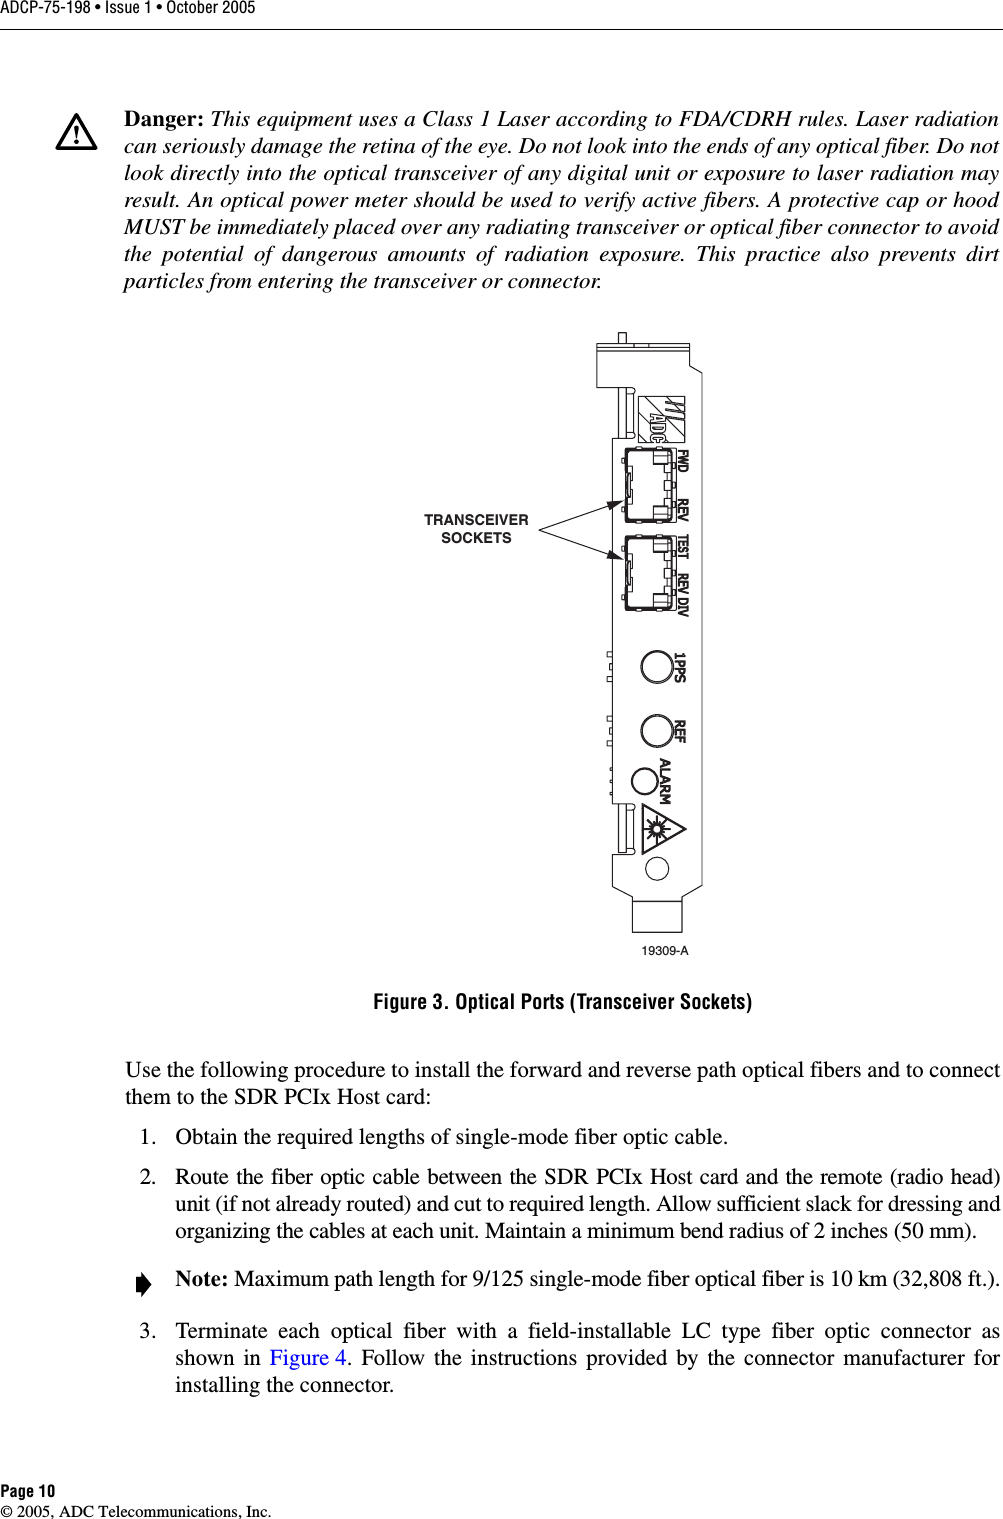 ADCP-75-198 • Issue 1 • October 2005Page 10© 2005, ADC Telecommunications, Inc.Figure 3. Optical Ports (Transceiver Sockets)Use the following procedure to install the forward and reverse path optical fibers and to connectthem to the SDR PCIx Host card: 1. Obtain the required lengths of single-mode fiber optic cable. 2. Route the fiber optic cable between the SDR PCIx Host card and the remote (radio head)unit (if not already routed) and cut to required length. Allow sufficient slack for dressing andorganizing the cables at each unit. Maintain a minimum bend radius of 2 inches (50 mm).3. Terminate each optical fiber with a field-installable LC type fiber optic connector asshown in Figure 4. Follow the instructions provided by the connector manufacturer forinstalling the connector. Danger: This equipment uses a Class 1 Laser according to FDA/CDRH rules. Laser radiationcan seriously damage the retina of the eye. Do not look into the ends of any optical fiber. Do notlook directly into the optical transceiver of any digital unit or exposure to laser radiation mayresult. An optical power meter should be used to verify active fibers. A protective cap or hoodMUST be immediately placed over any radiating transceiver or optical fiber connector to avoidthe potential of dangerous amounts of radiation exposure. This practice also prevents dirtparticles from entering the transceiver or connector.Note: Maximum path length for 9/125 single-mode fiber optical fiber is 10 km (32,808 ft.).19309-ATRANSCEIVERSOCKETS